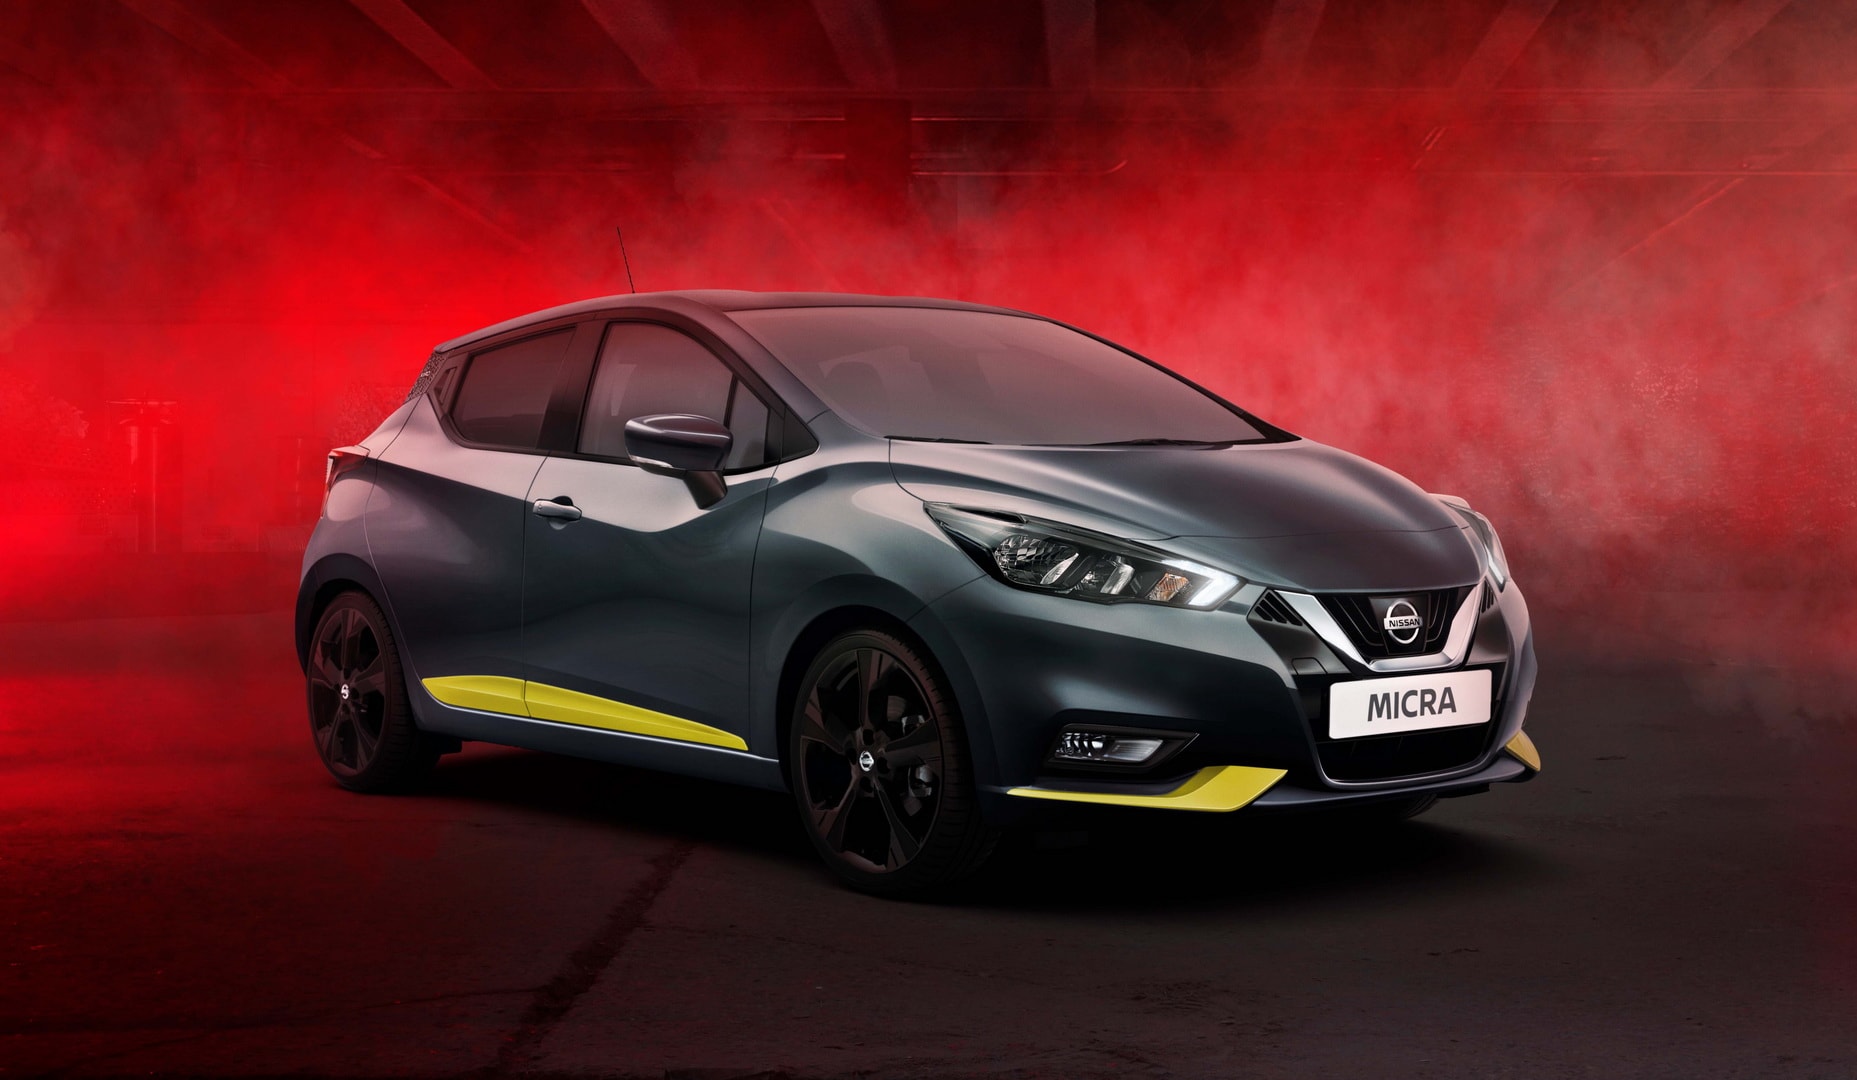 This is the new Nissan Micra